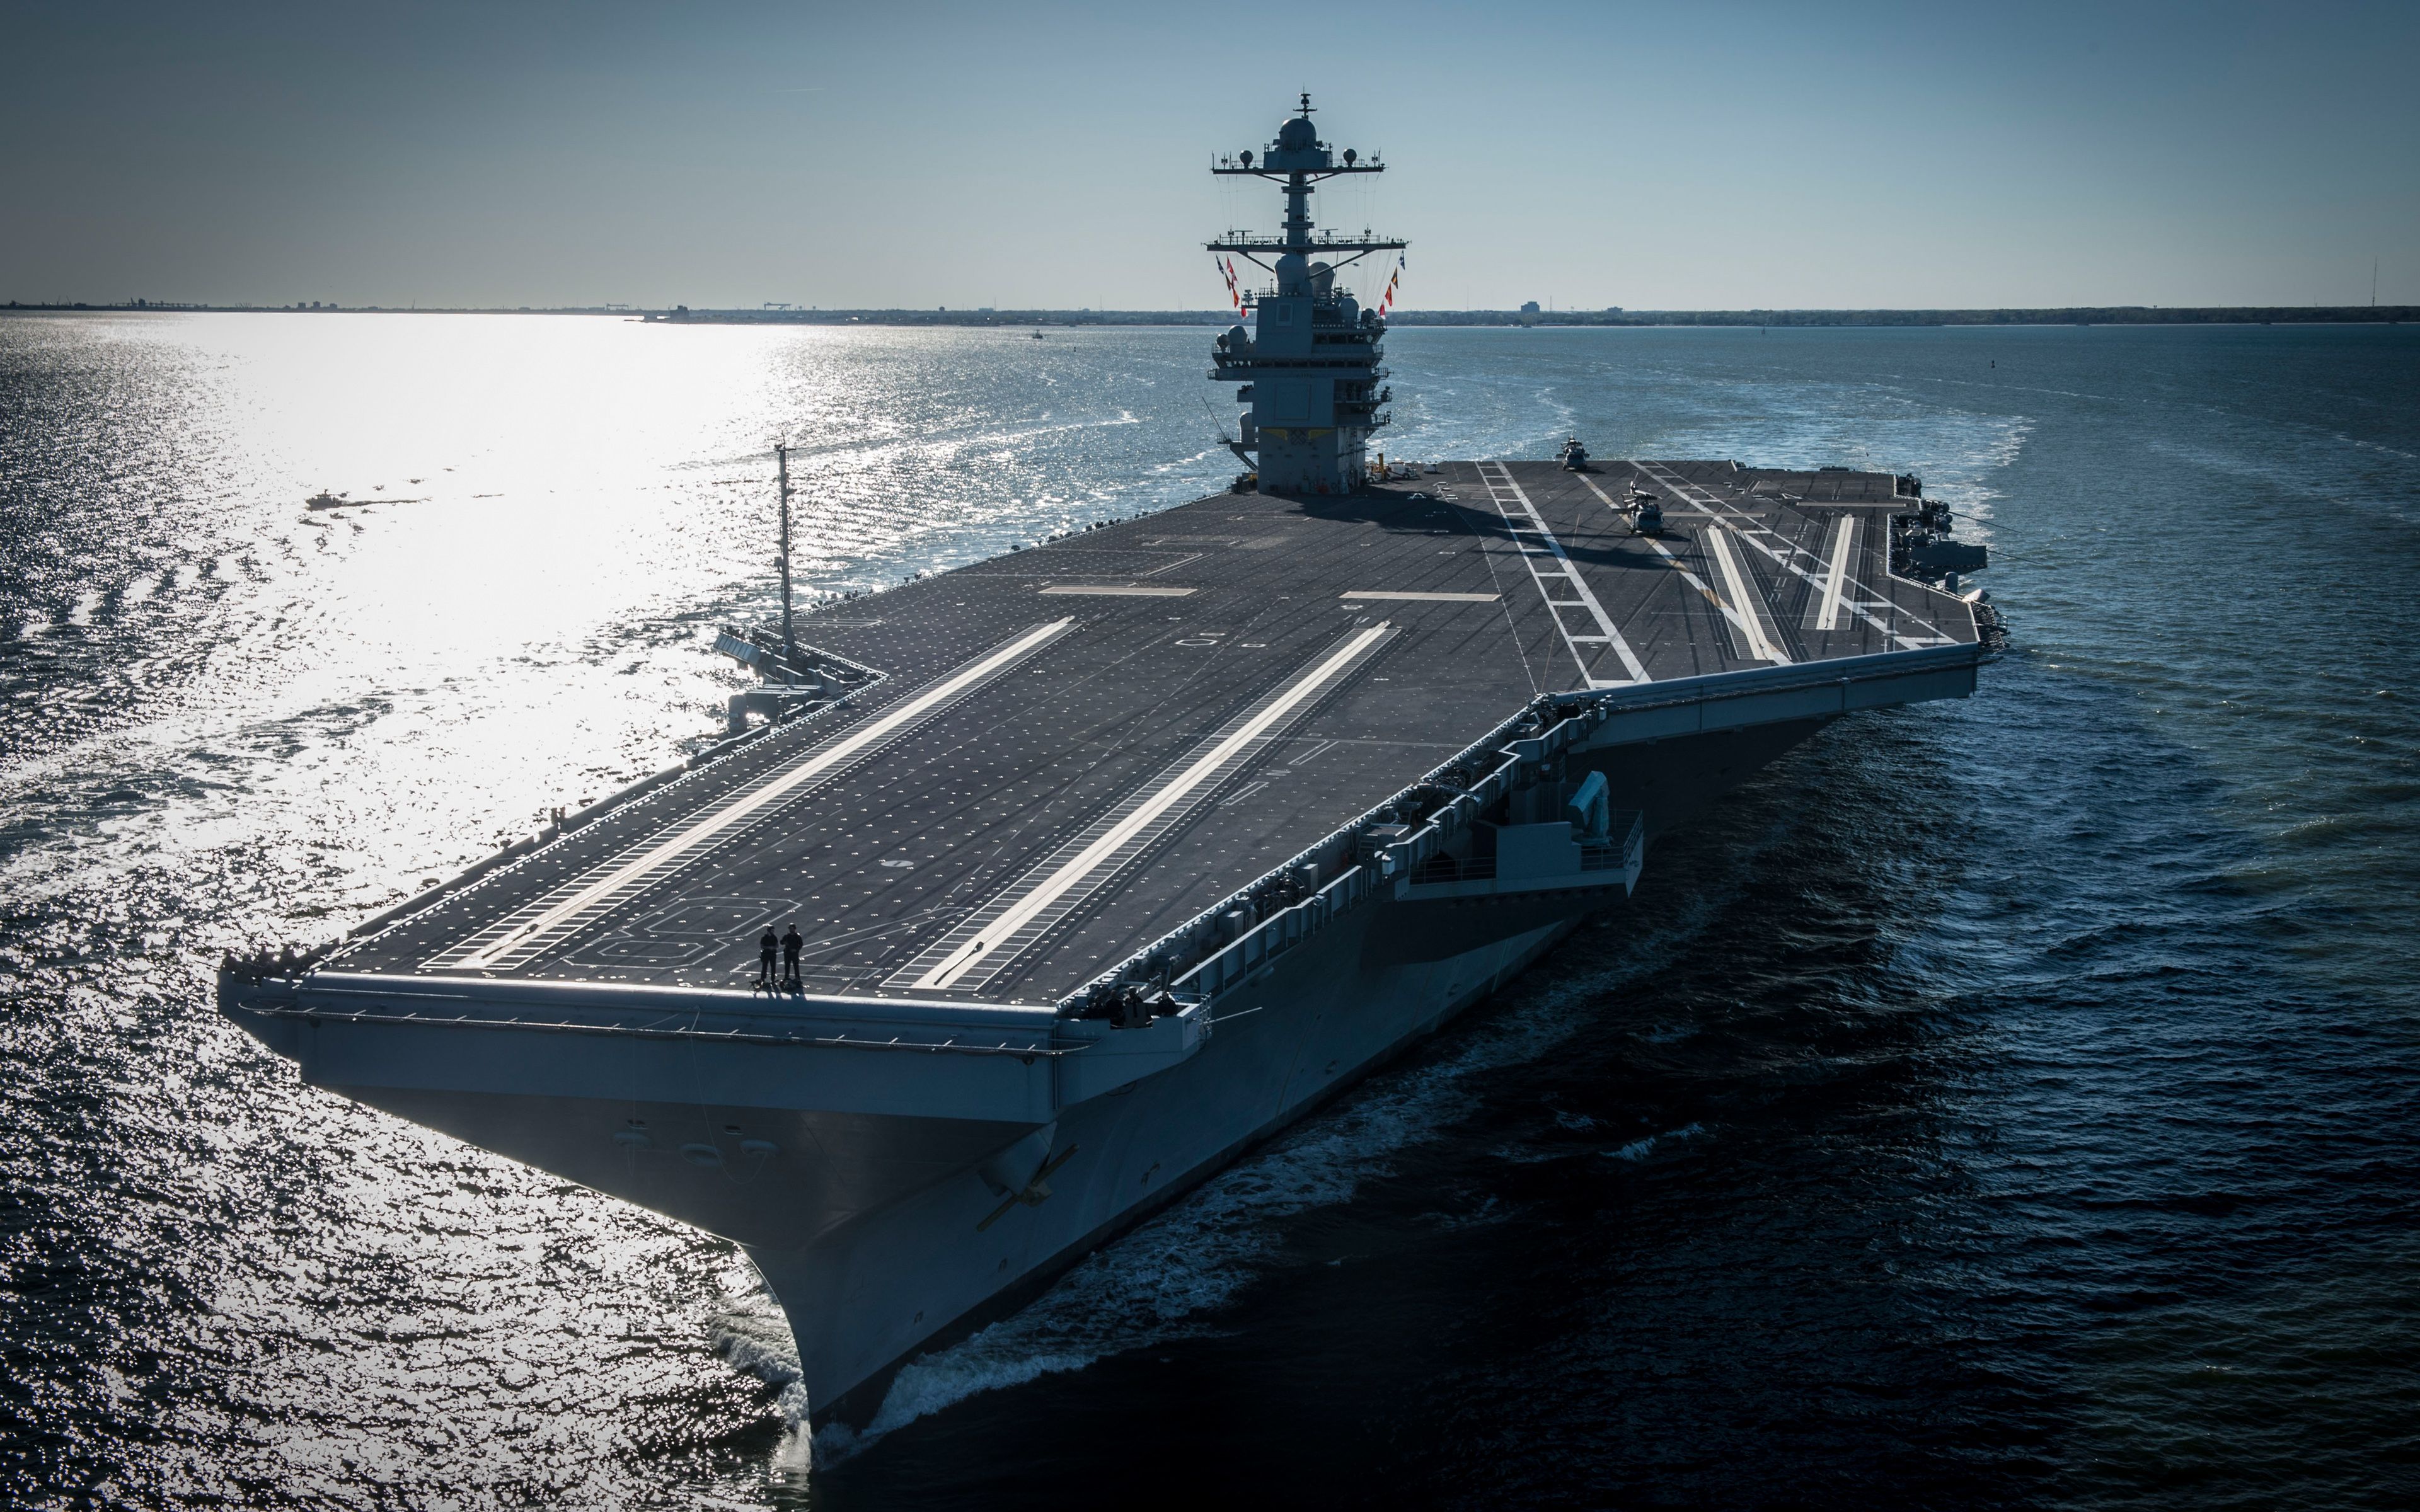 Download wallpaper USS Gerald R Ford, CVN- 4k, American aircraft carrier, US Navy, US, Nimitz, deck for desktop with resolution 3840x2400. High Quality HD picture wallpaper